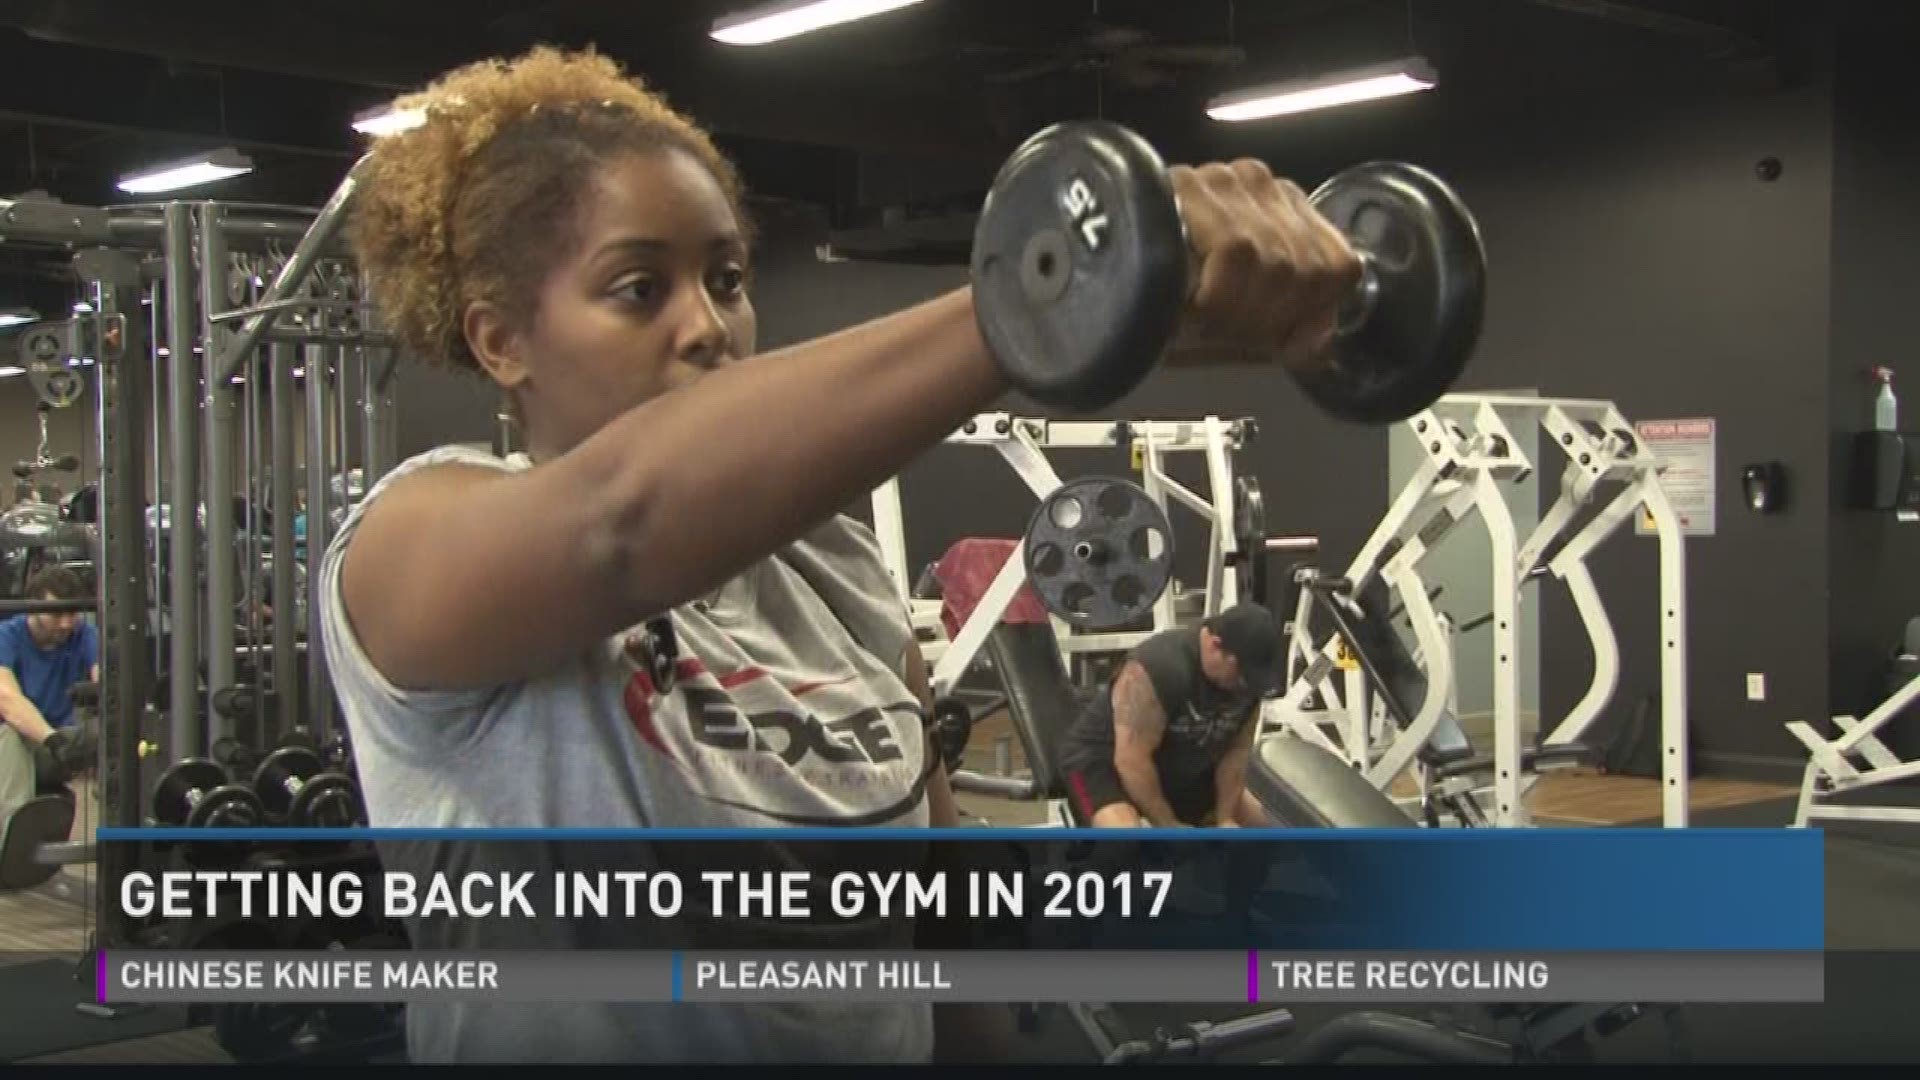 Many resolve to get back in the gym at the beginning of the year. Experts say take it slow and build yourself back up slowly.